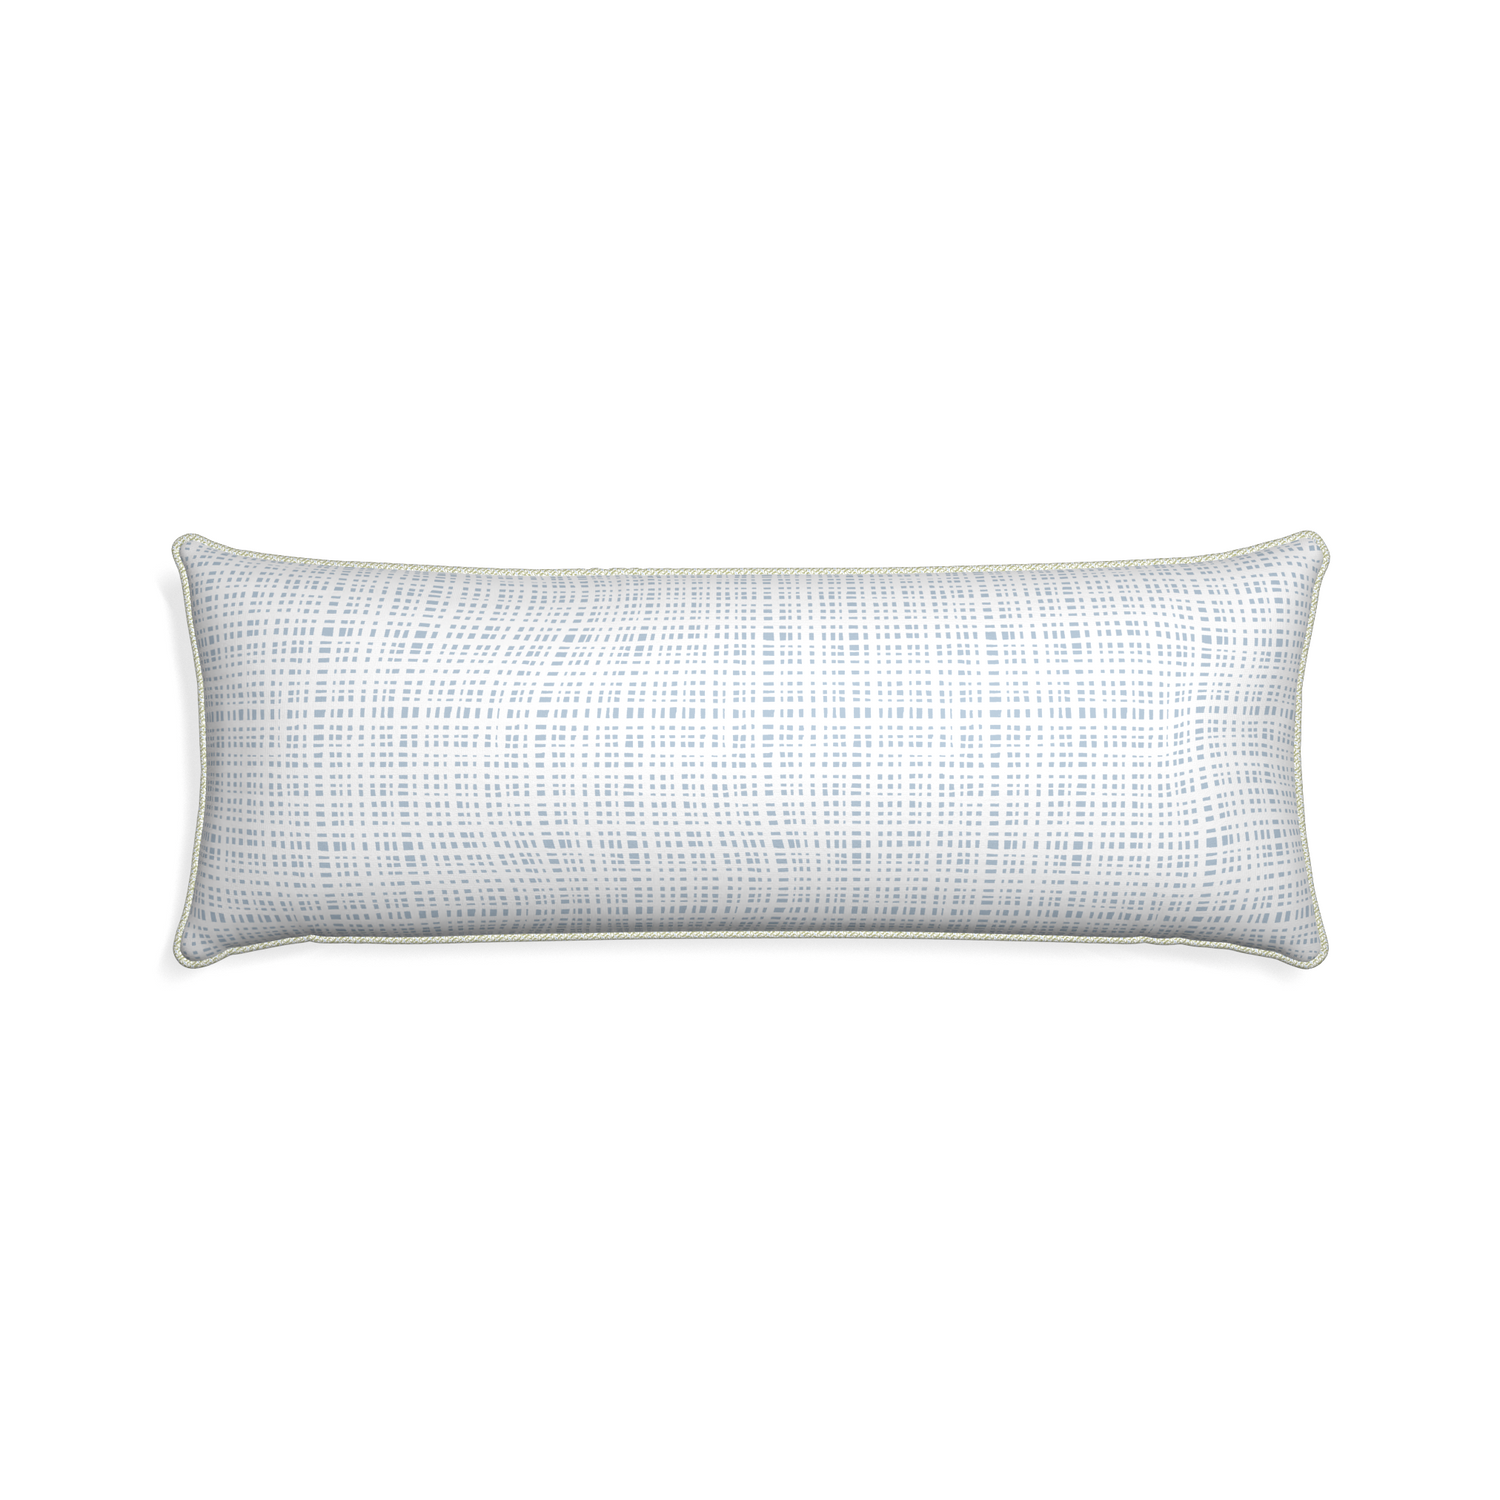 Xl-lumbar ginger sky custom plaid sky bluepillow with l piping on white background